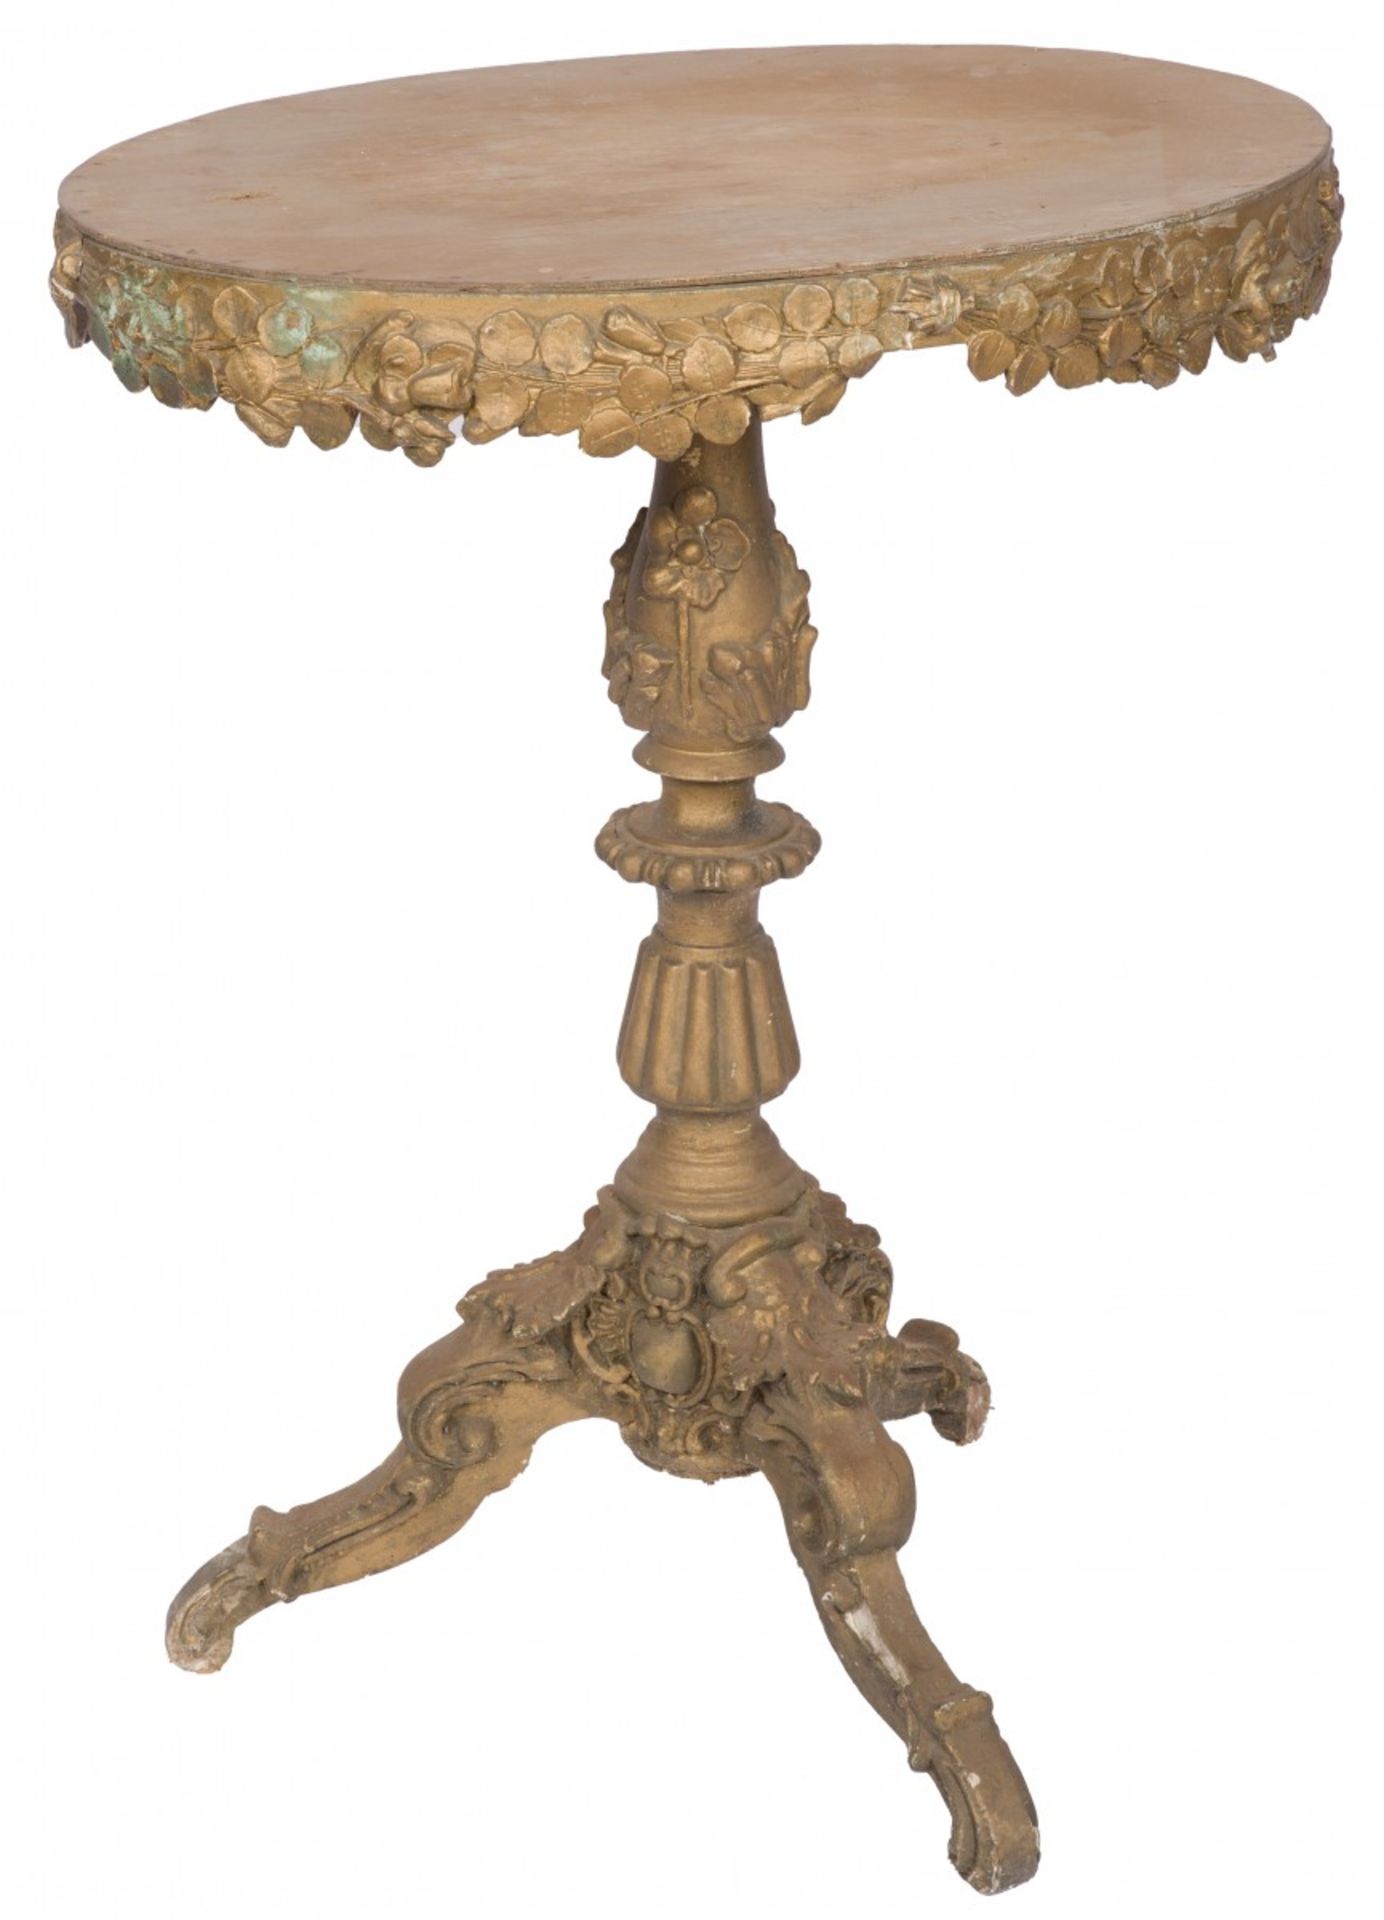 A gold painted accessory table, Germany, late 19th century.